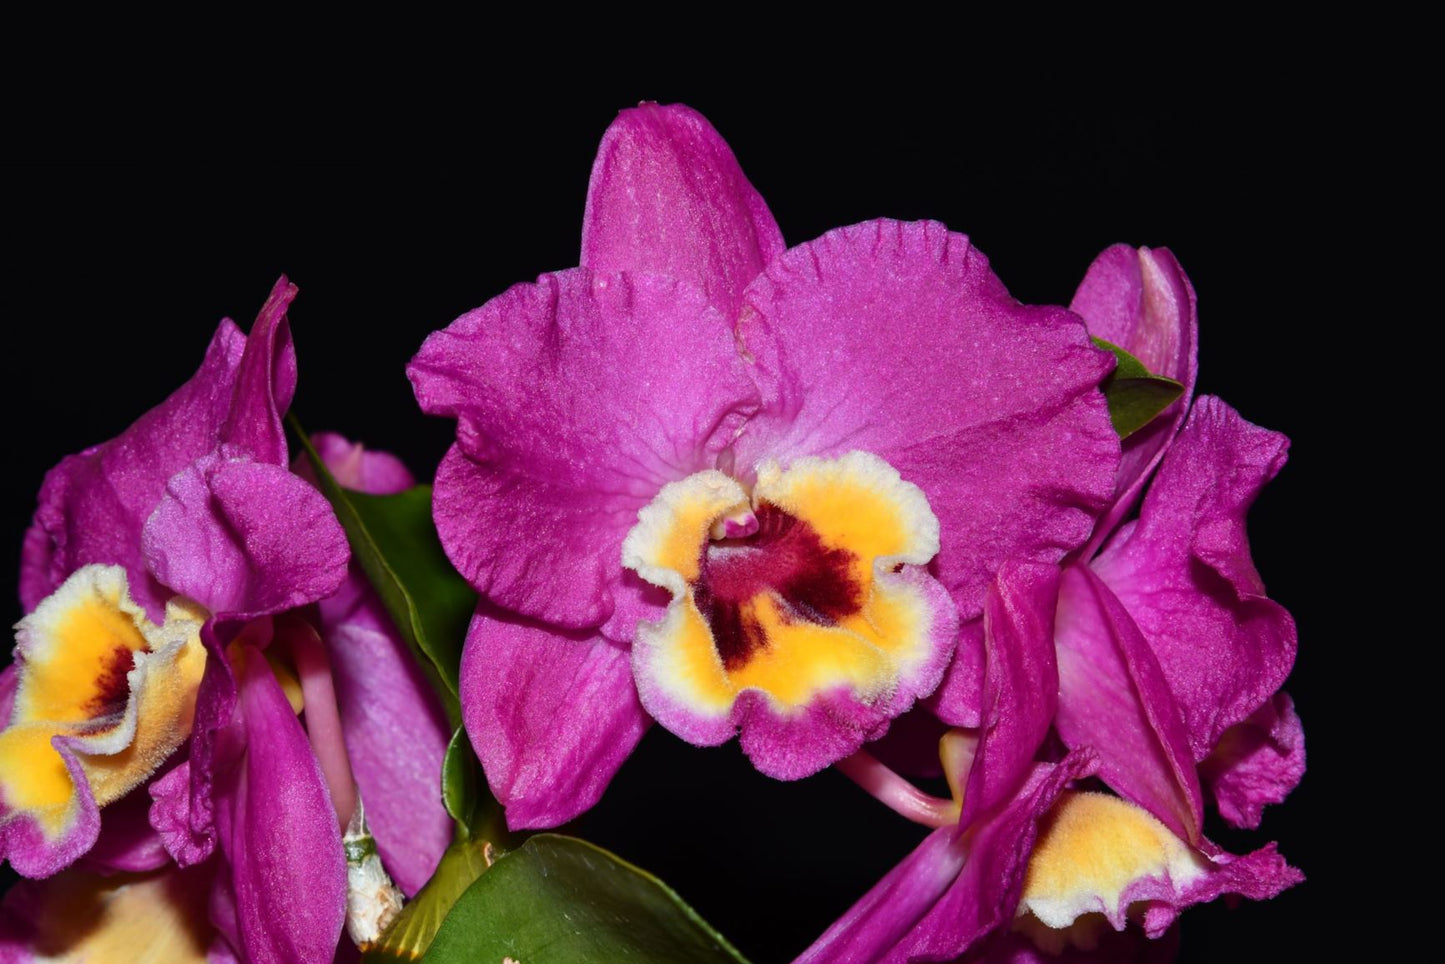 Dendrobium Nobile Bridal Red 'Celebration' Orchid. An easy care orchid with beautiful violet and yellow blooms (sold with no blooms).